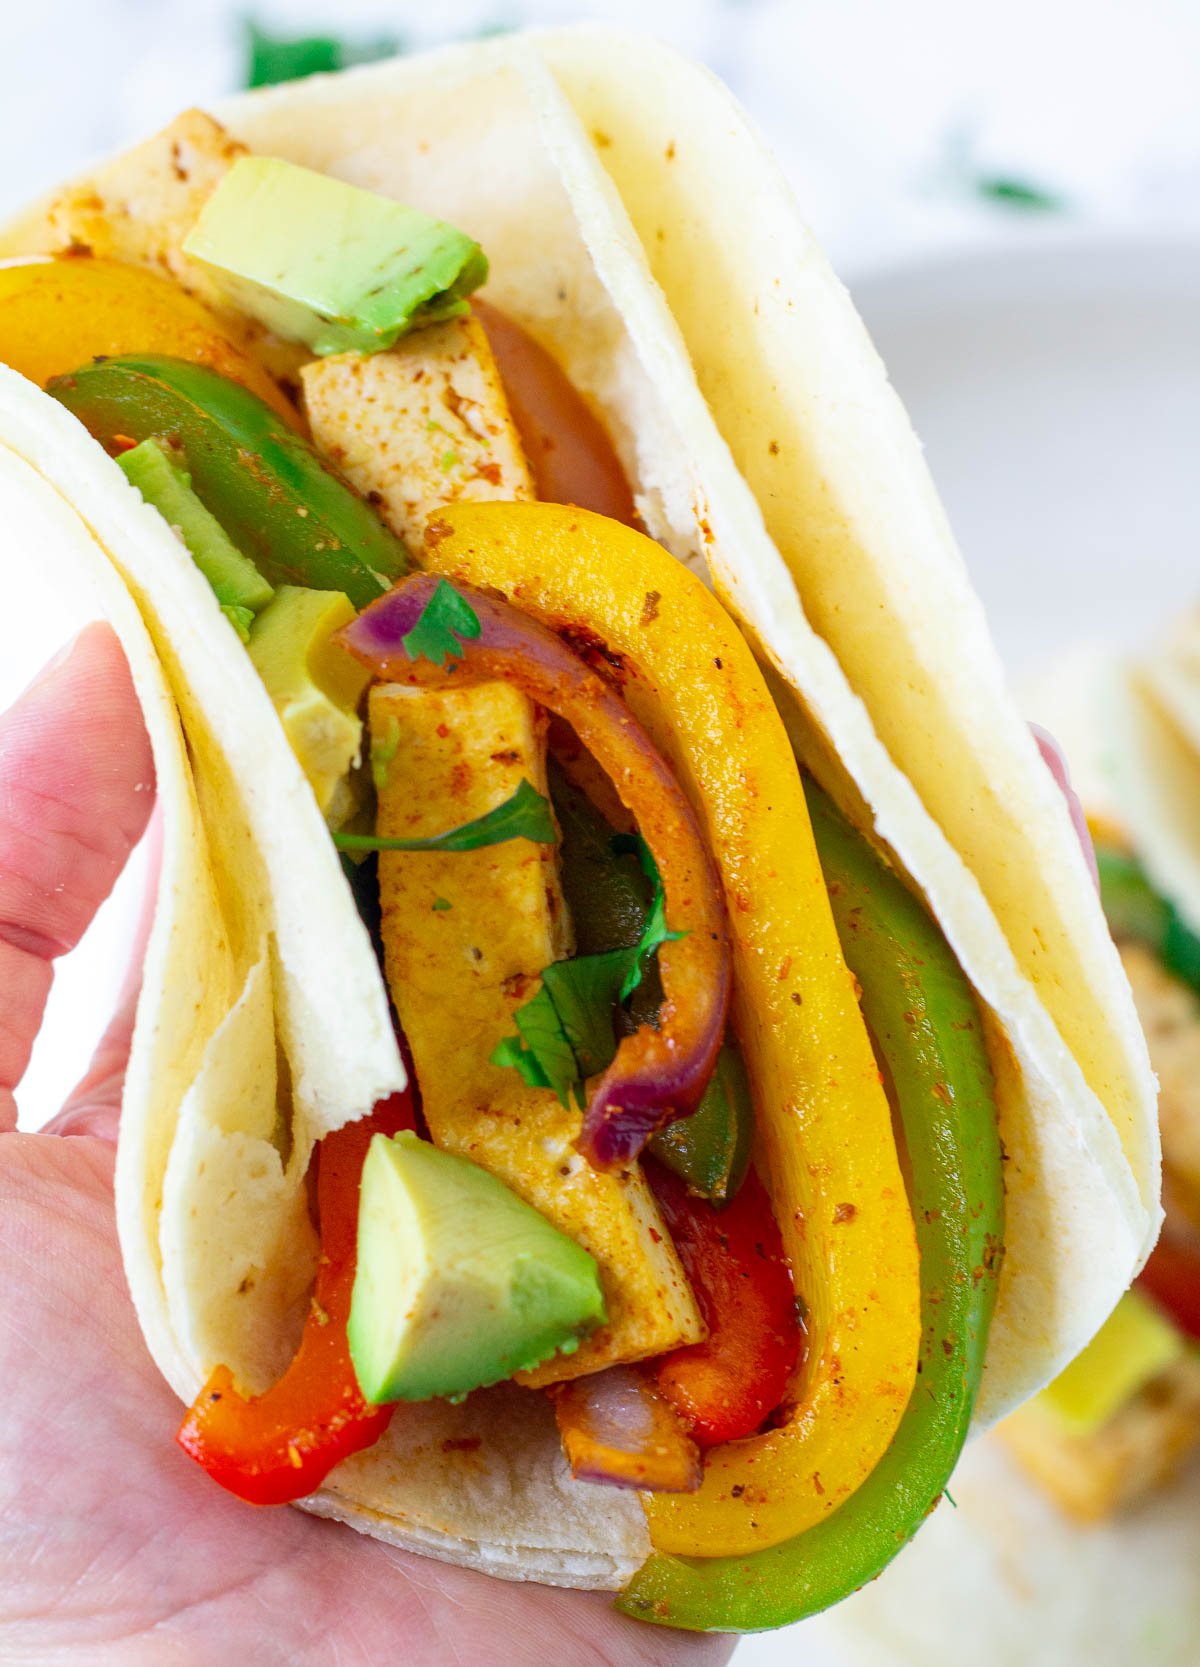 Hand holding a fajitas in a corn tortilla with tofu and peppers.